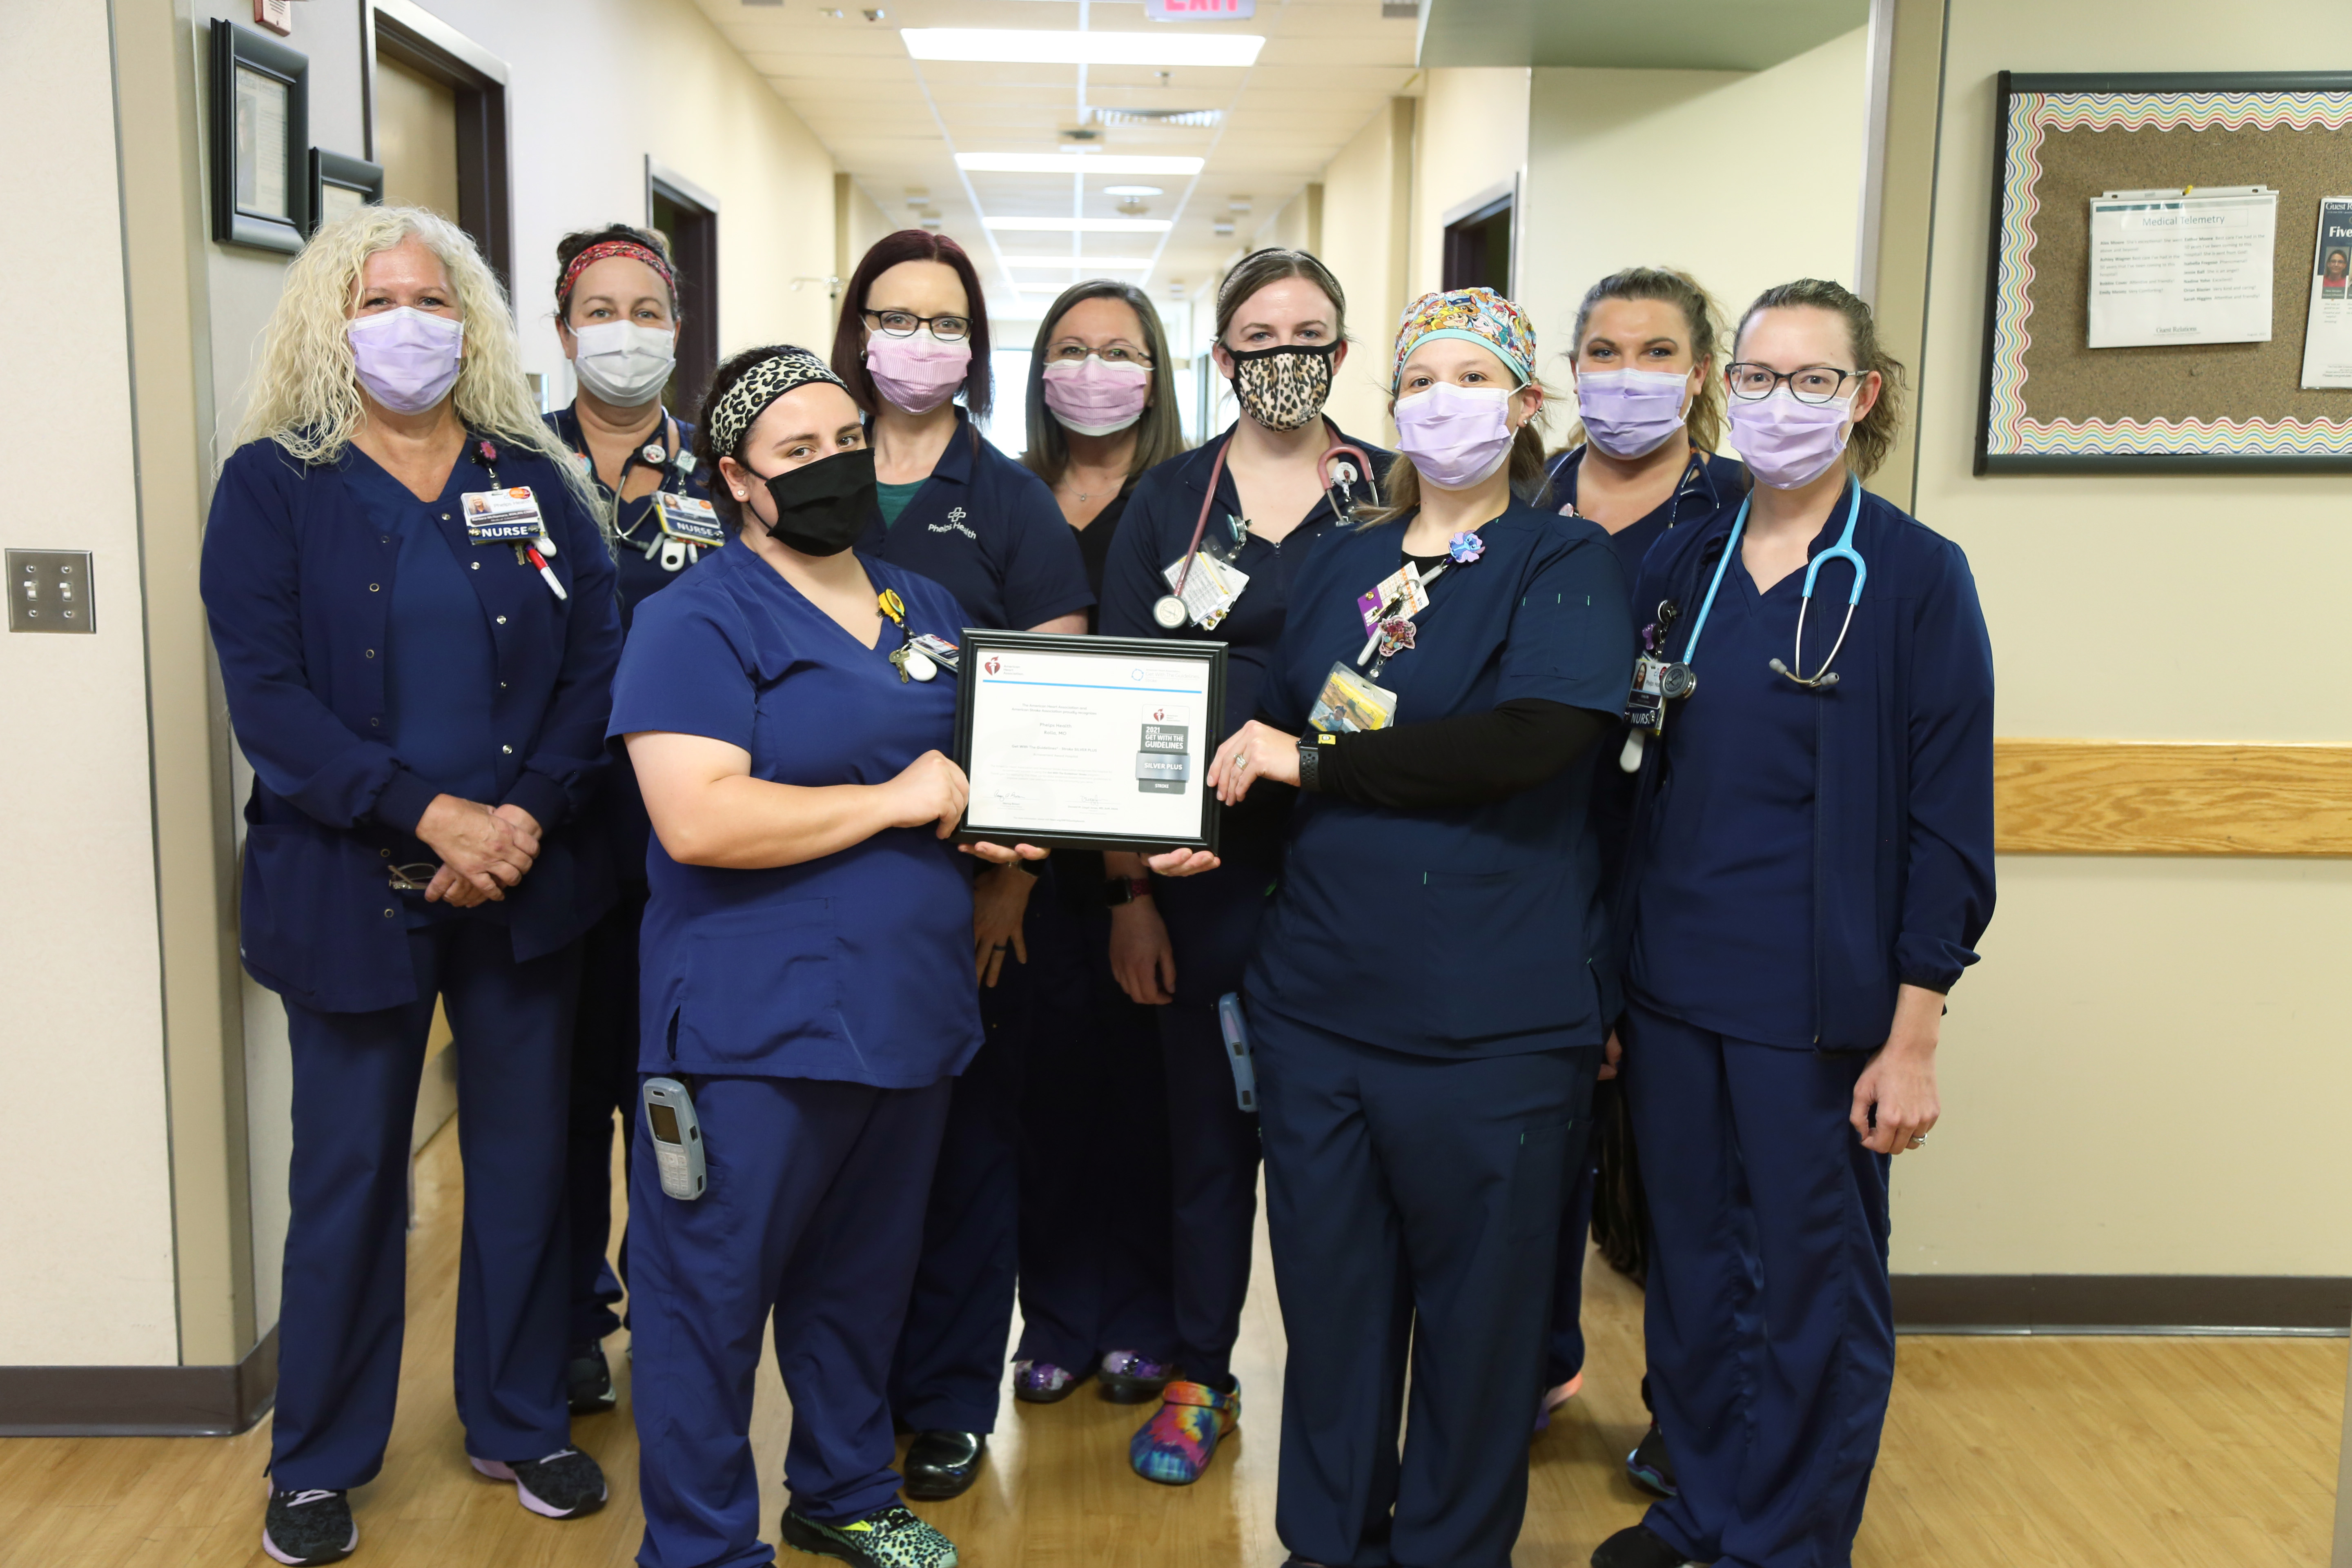 Phelps Health staff with Get with the Guidelines Award